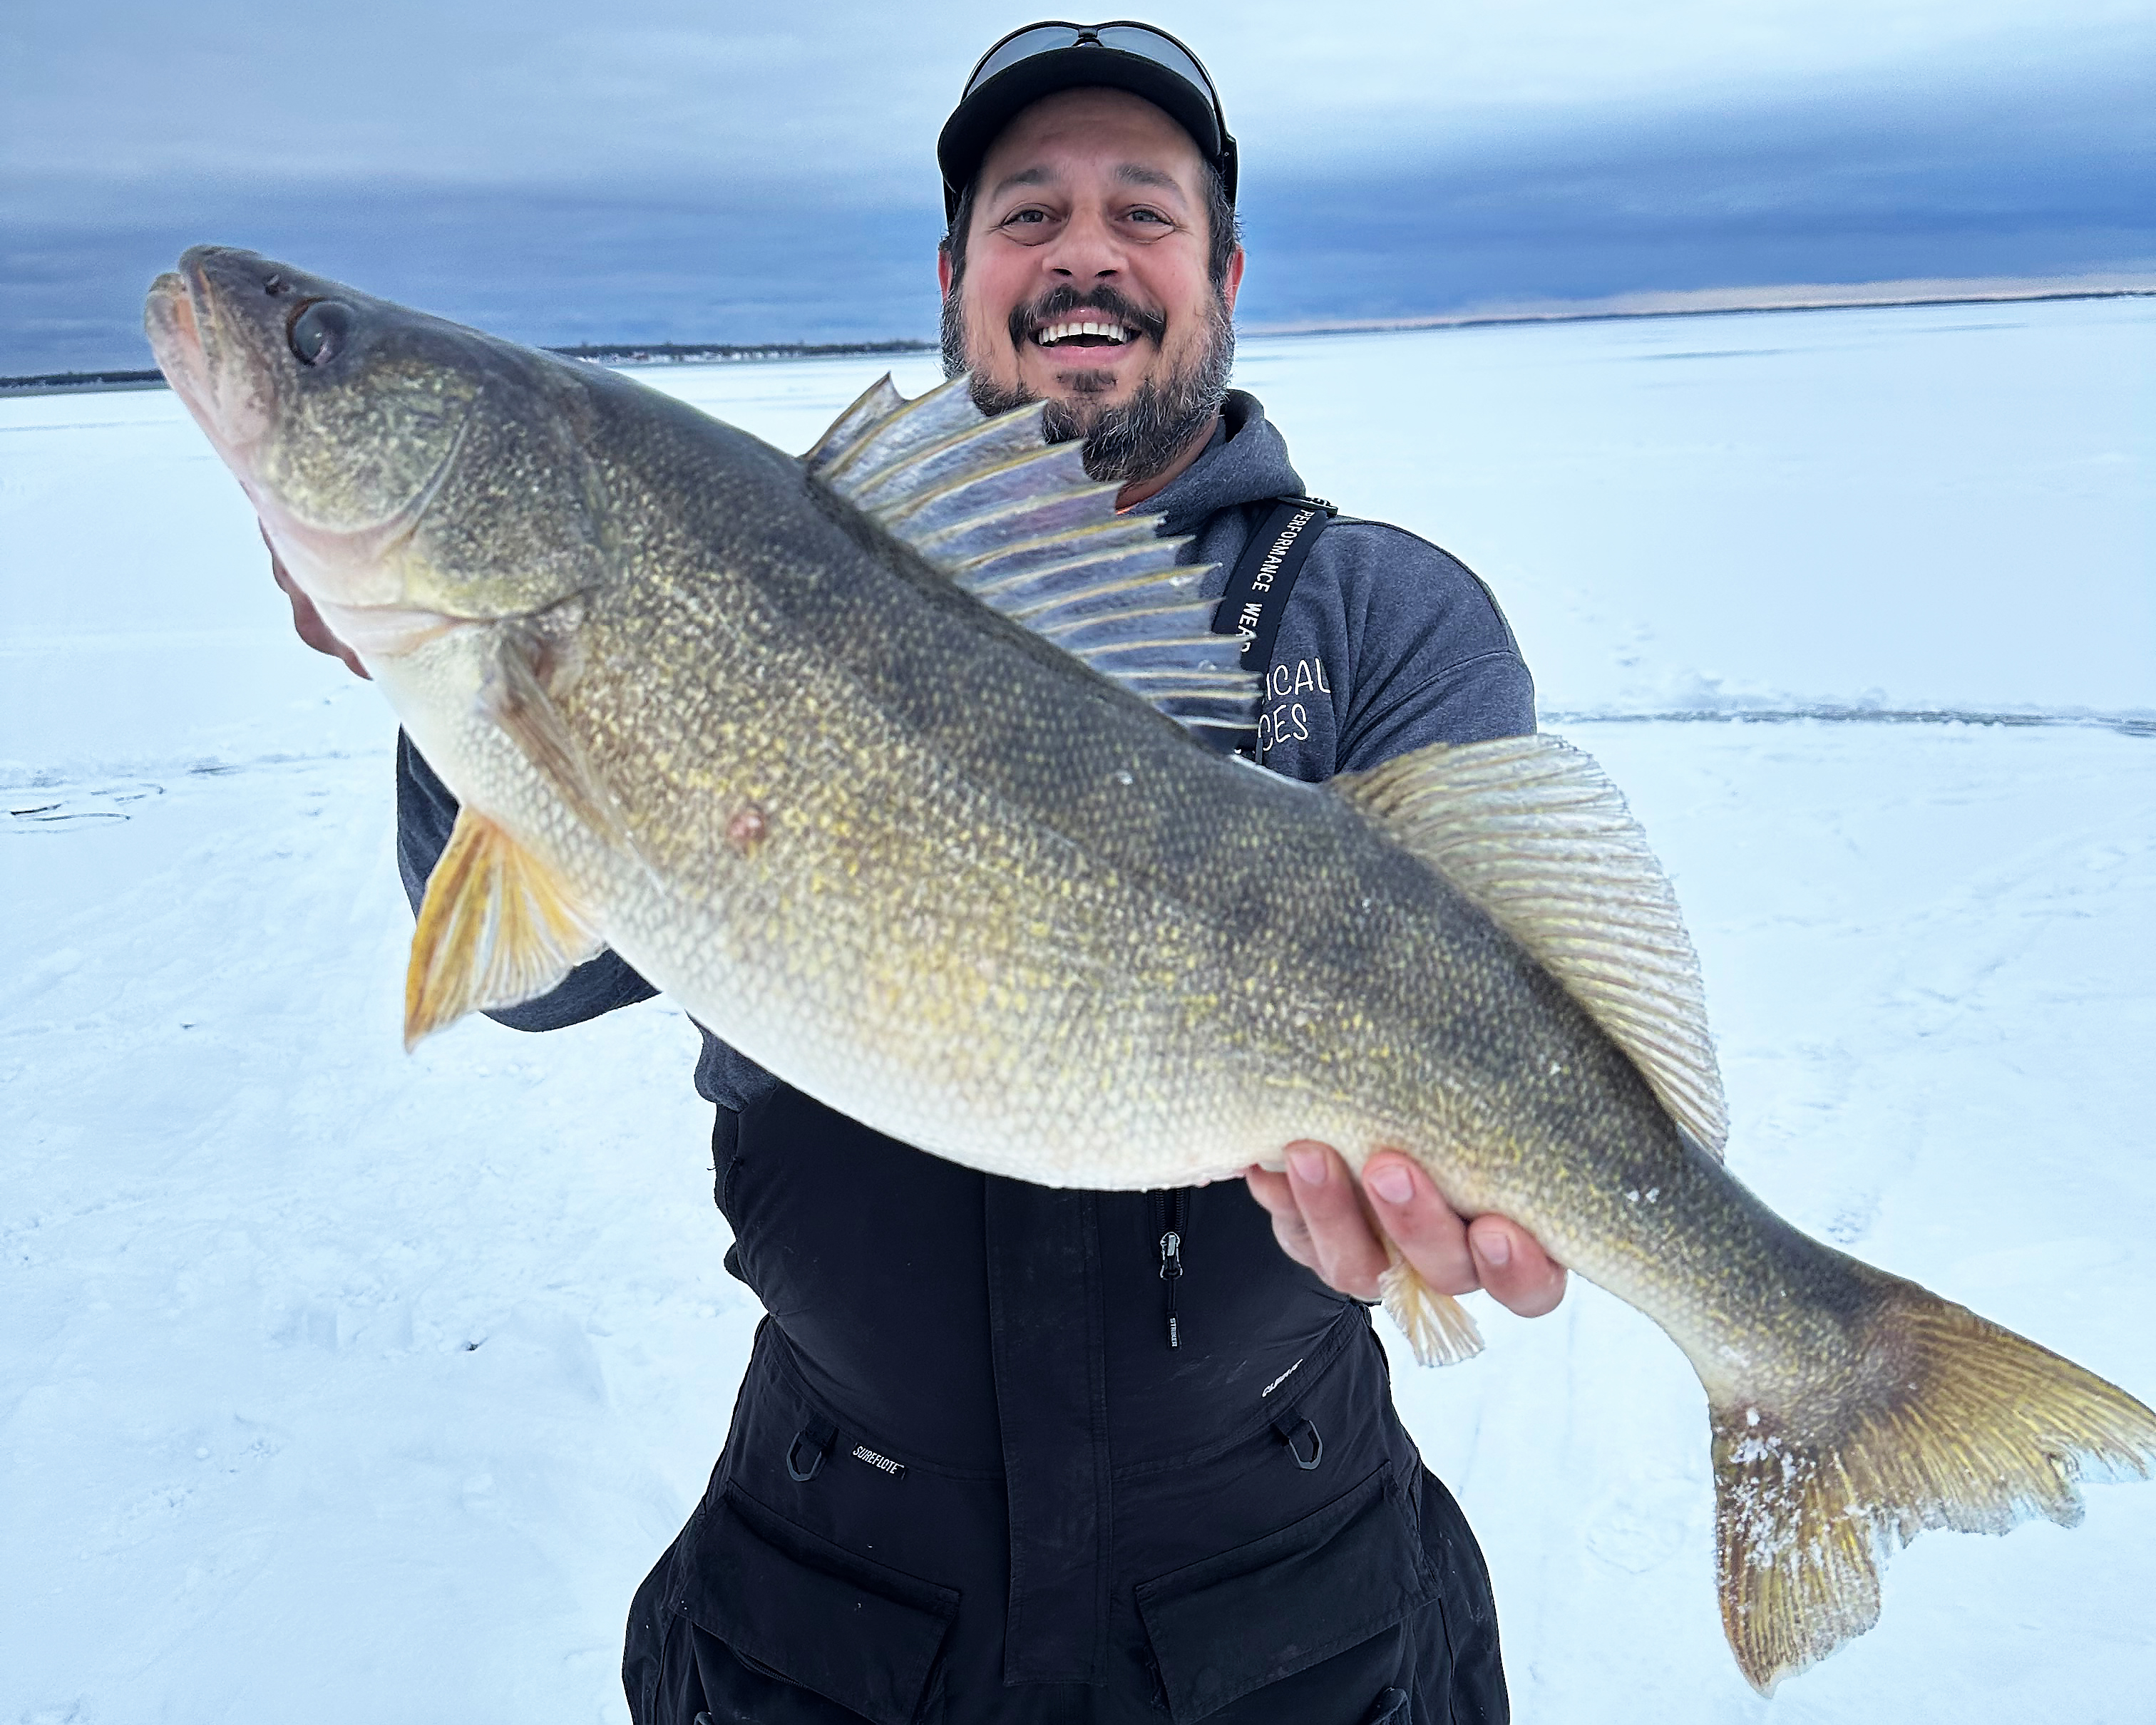 Angler uncorks enormous walleye from ice on Lake Ontario